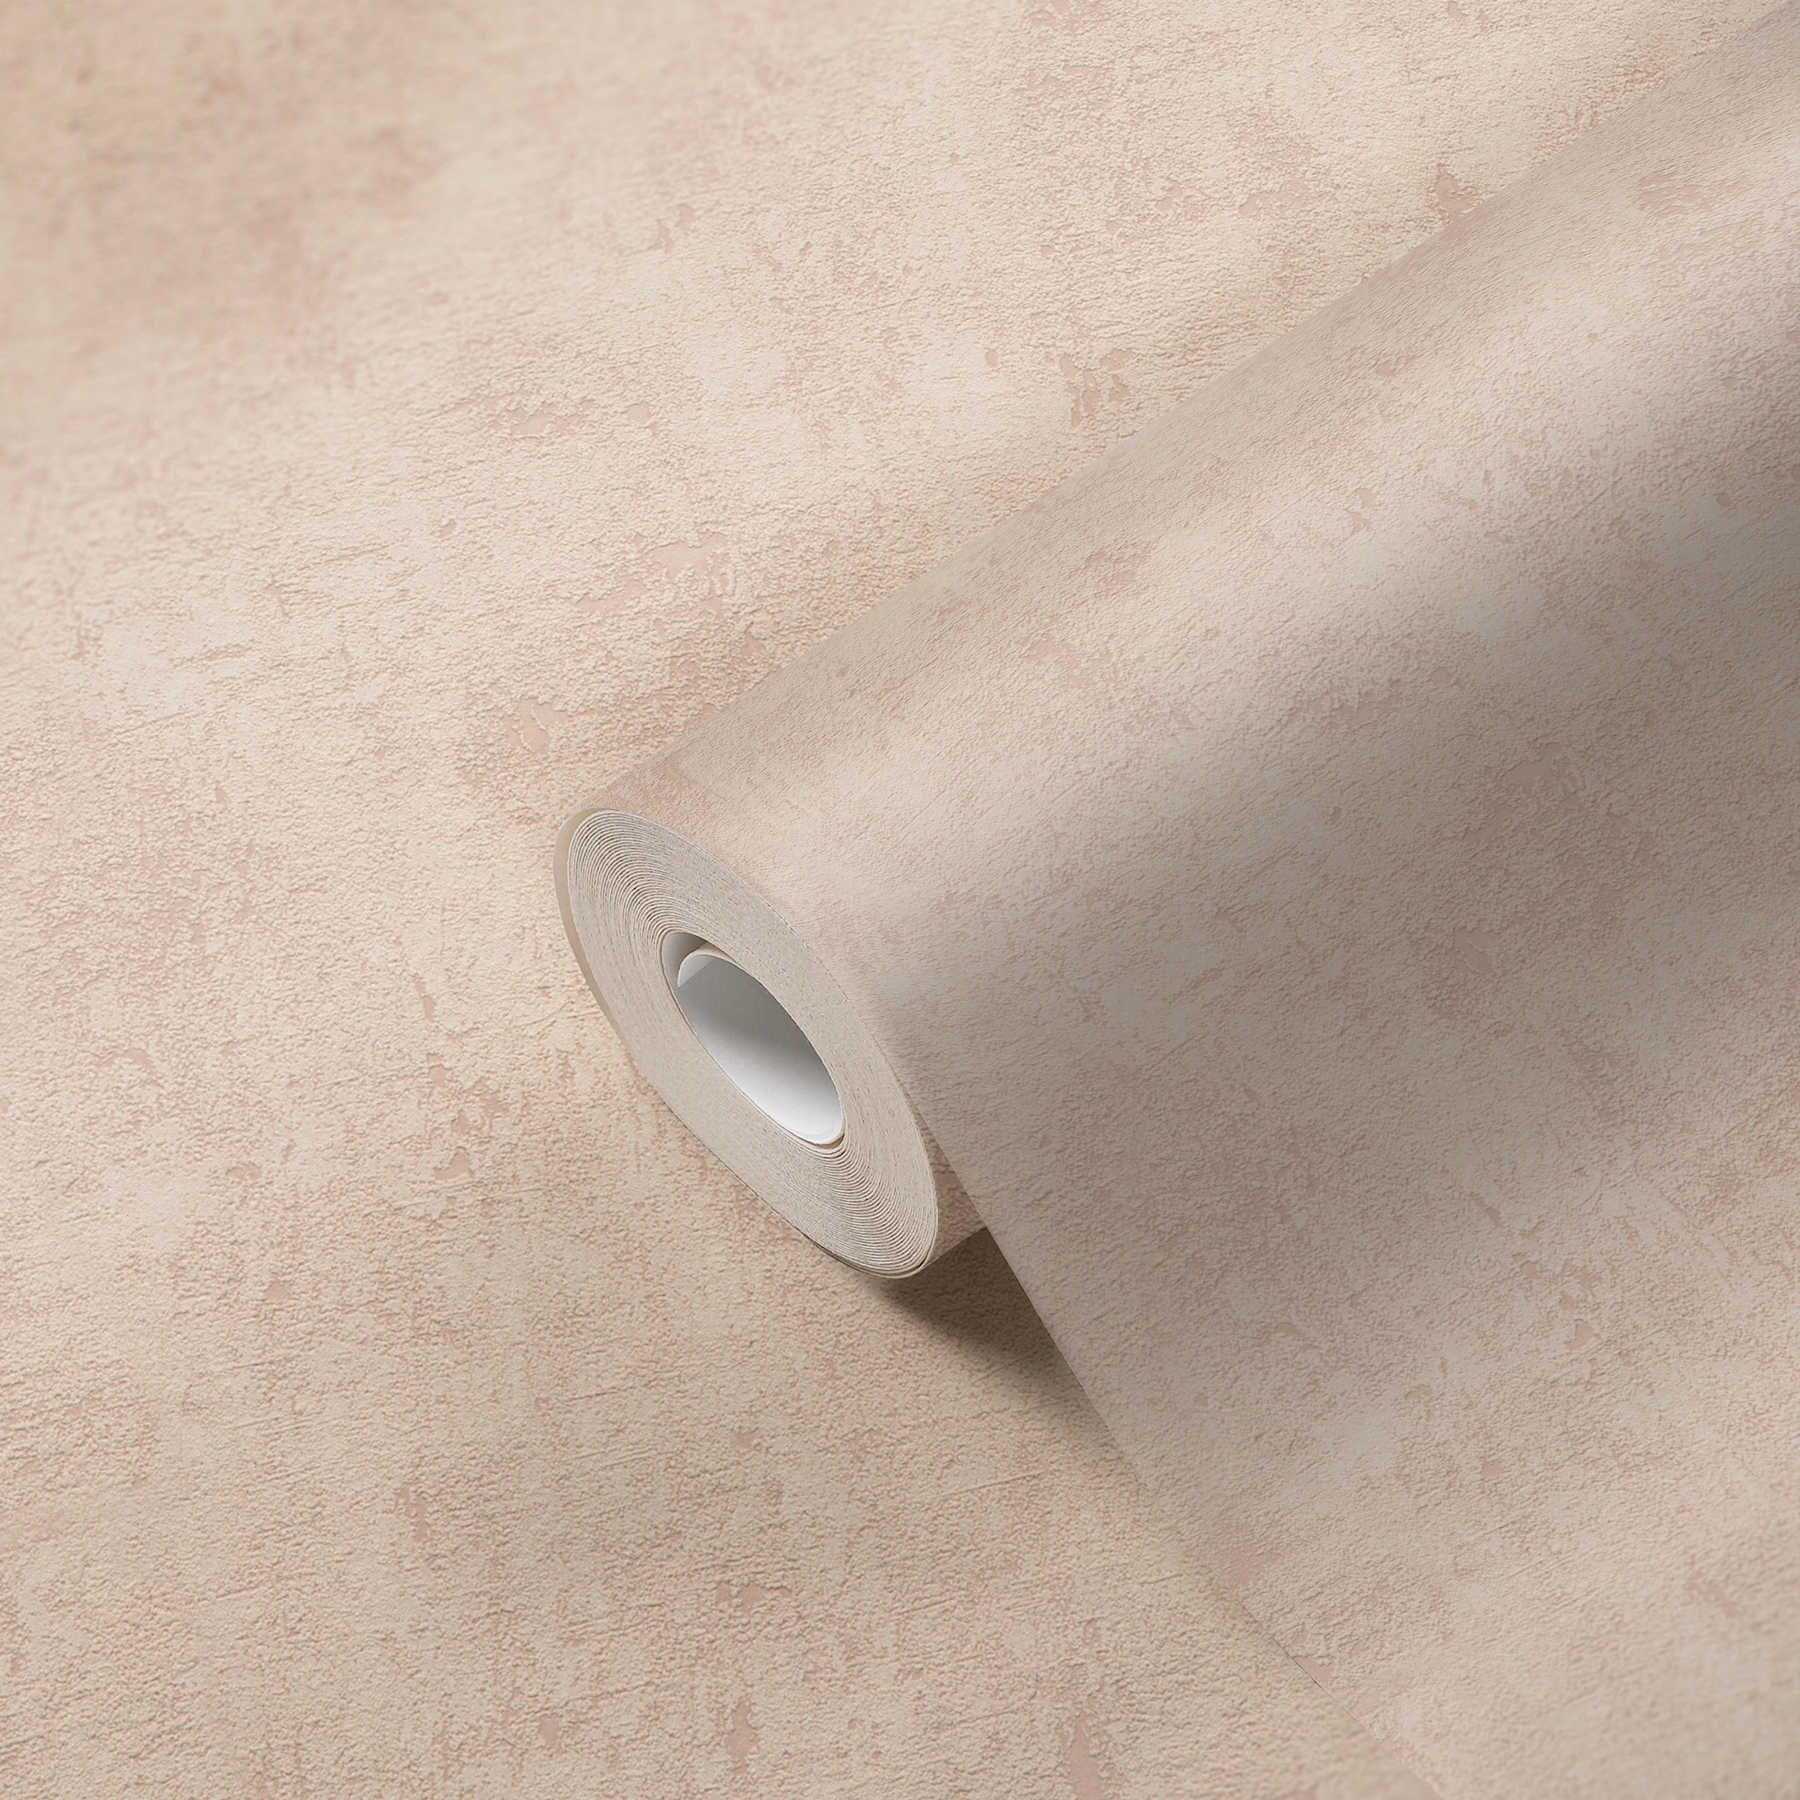             Plaster optics wallpaper non-woven in sand-beige with texture effect
        